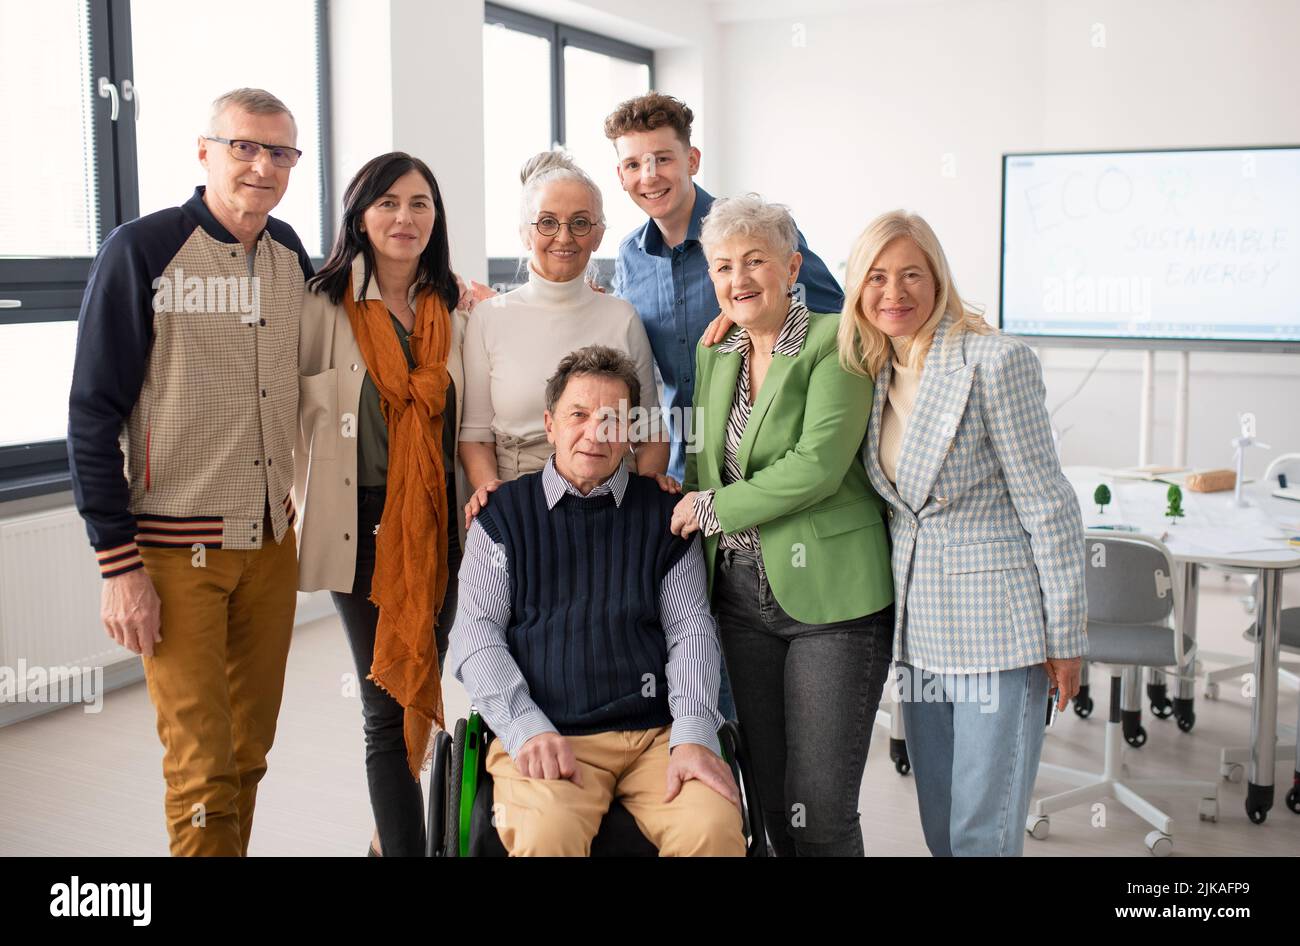 Happy senior students meeting with their friend on wheelchair at university. Stock Photo